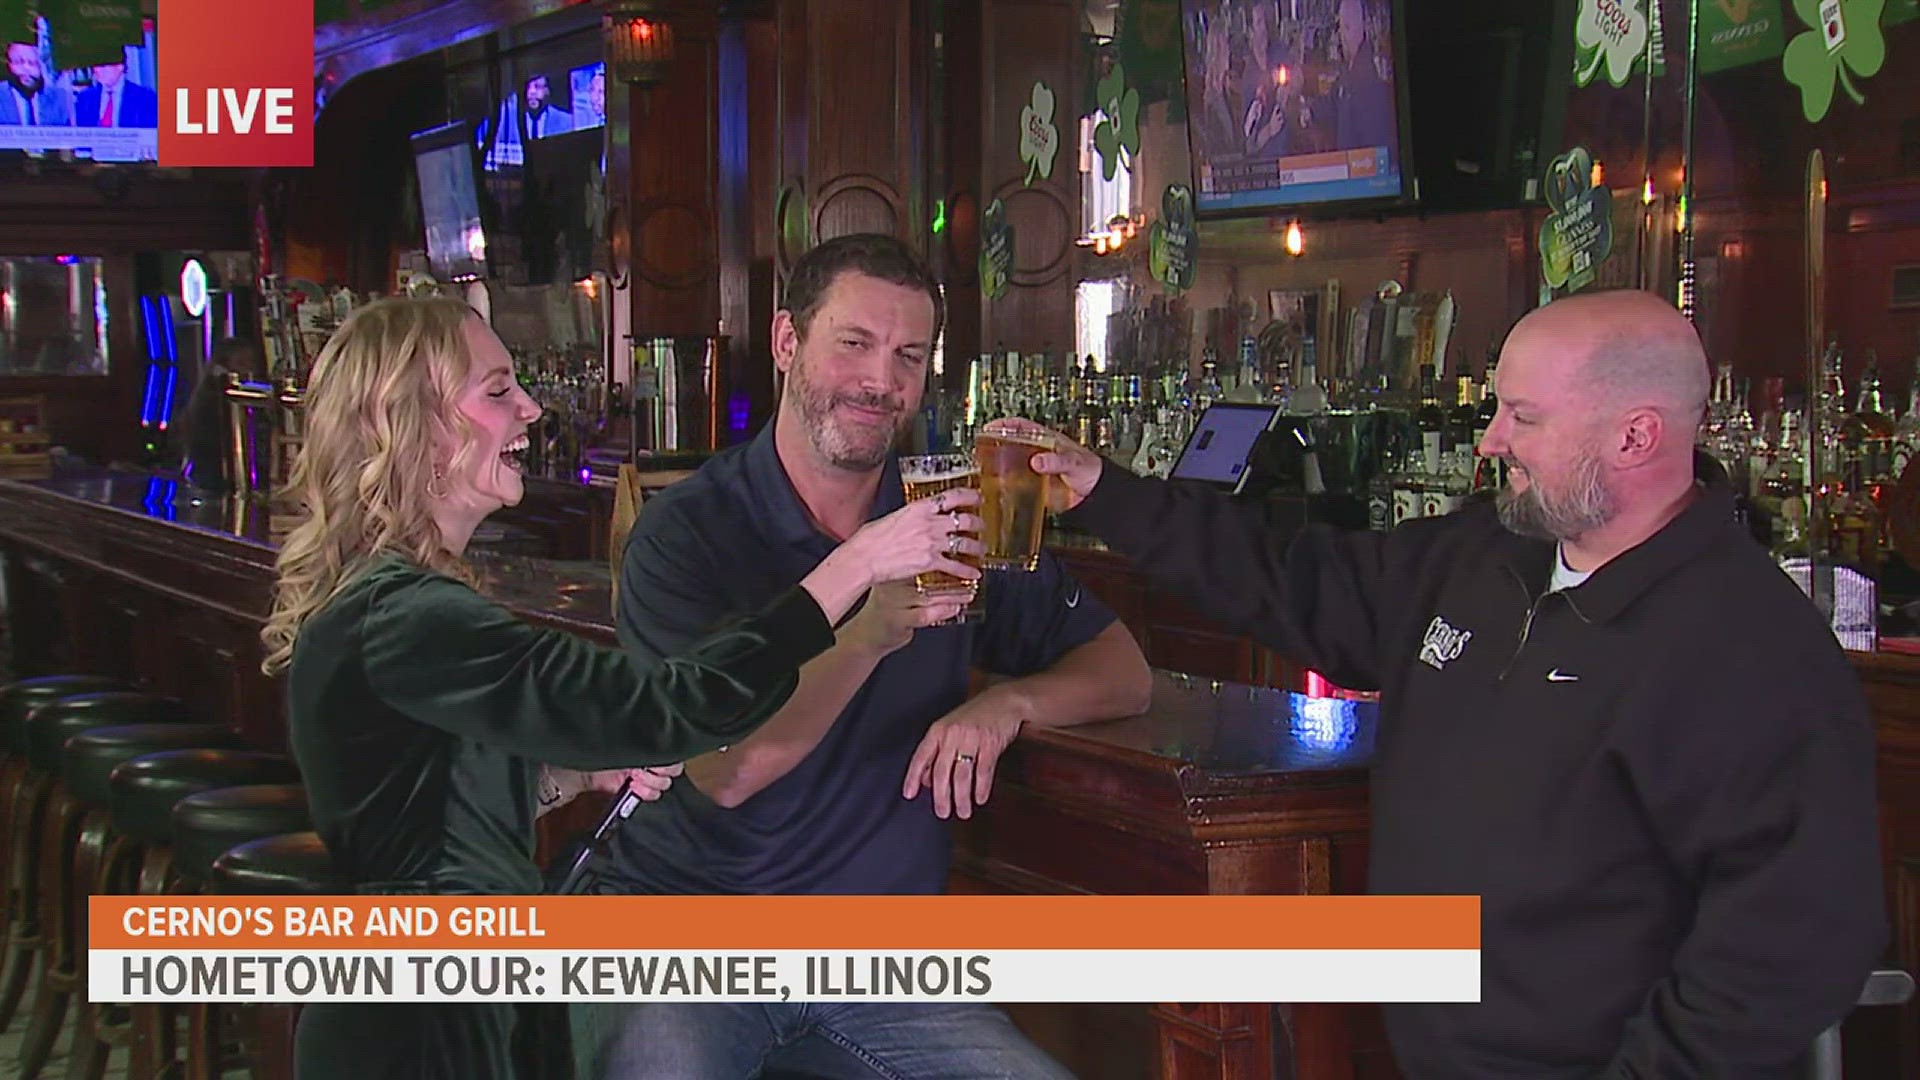 News 8's Shelby Kluver got the fun job for the day — hanging out at the bar with folks at Cerno's Bar & Grill!